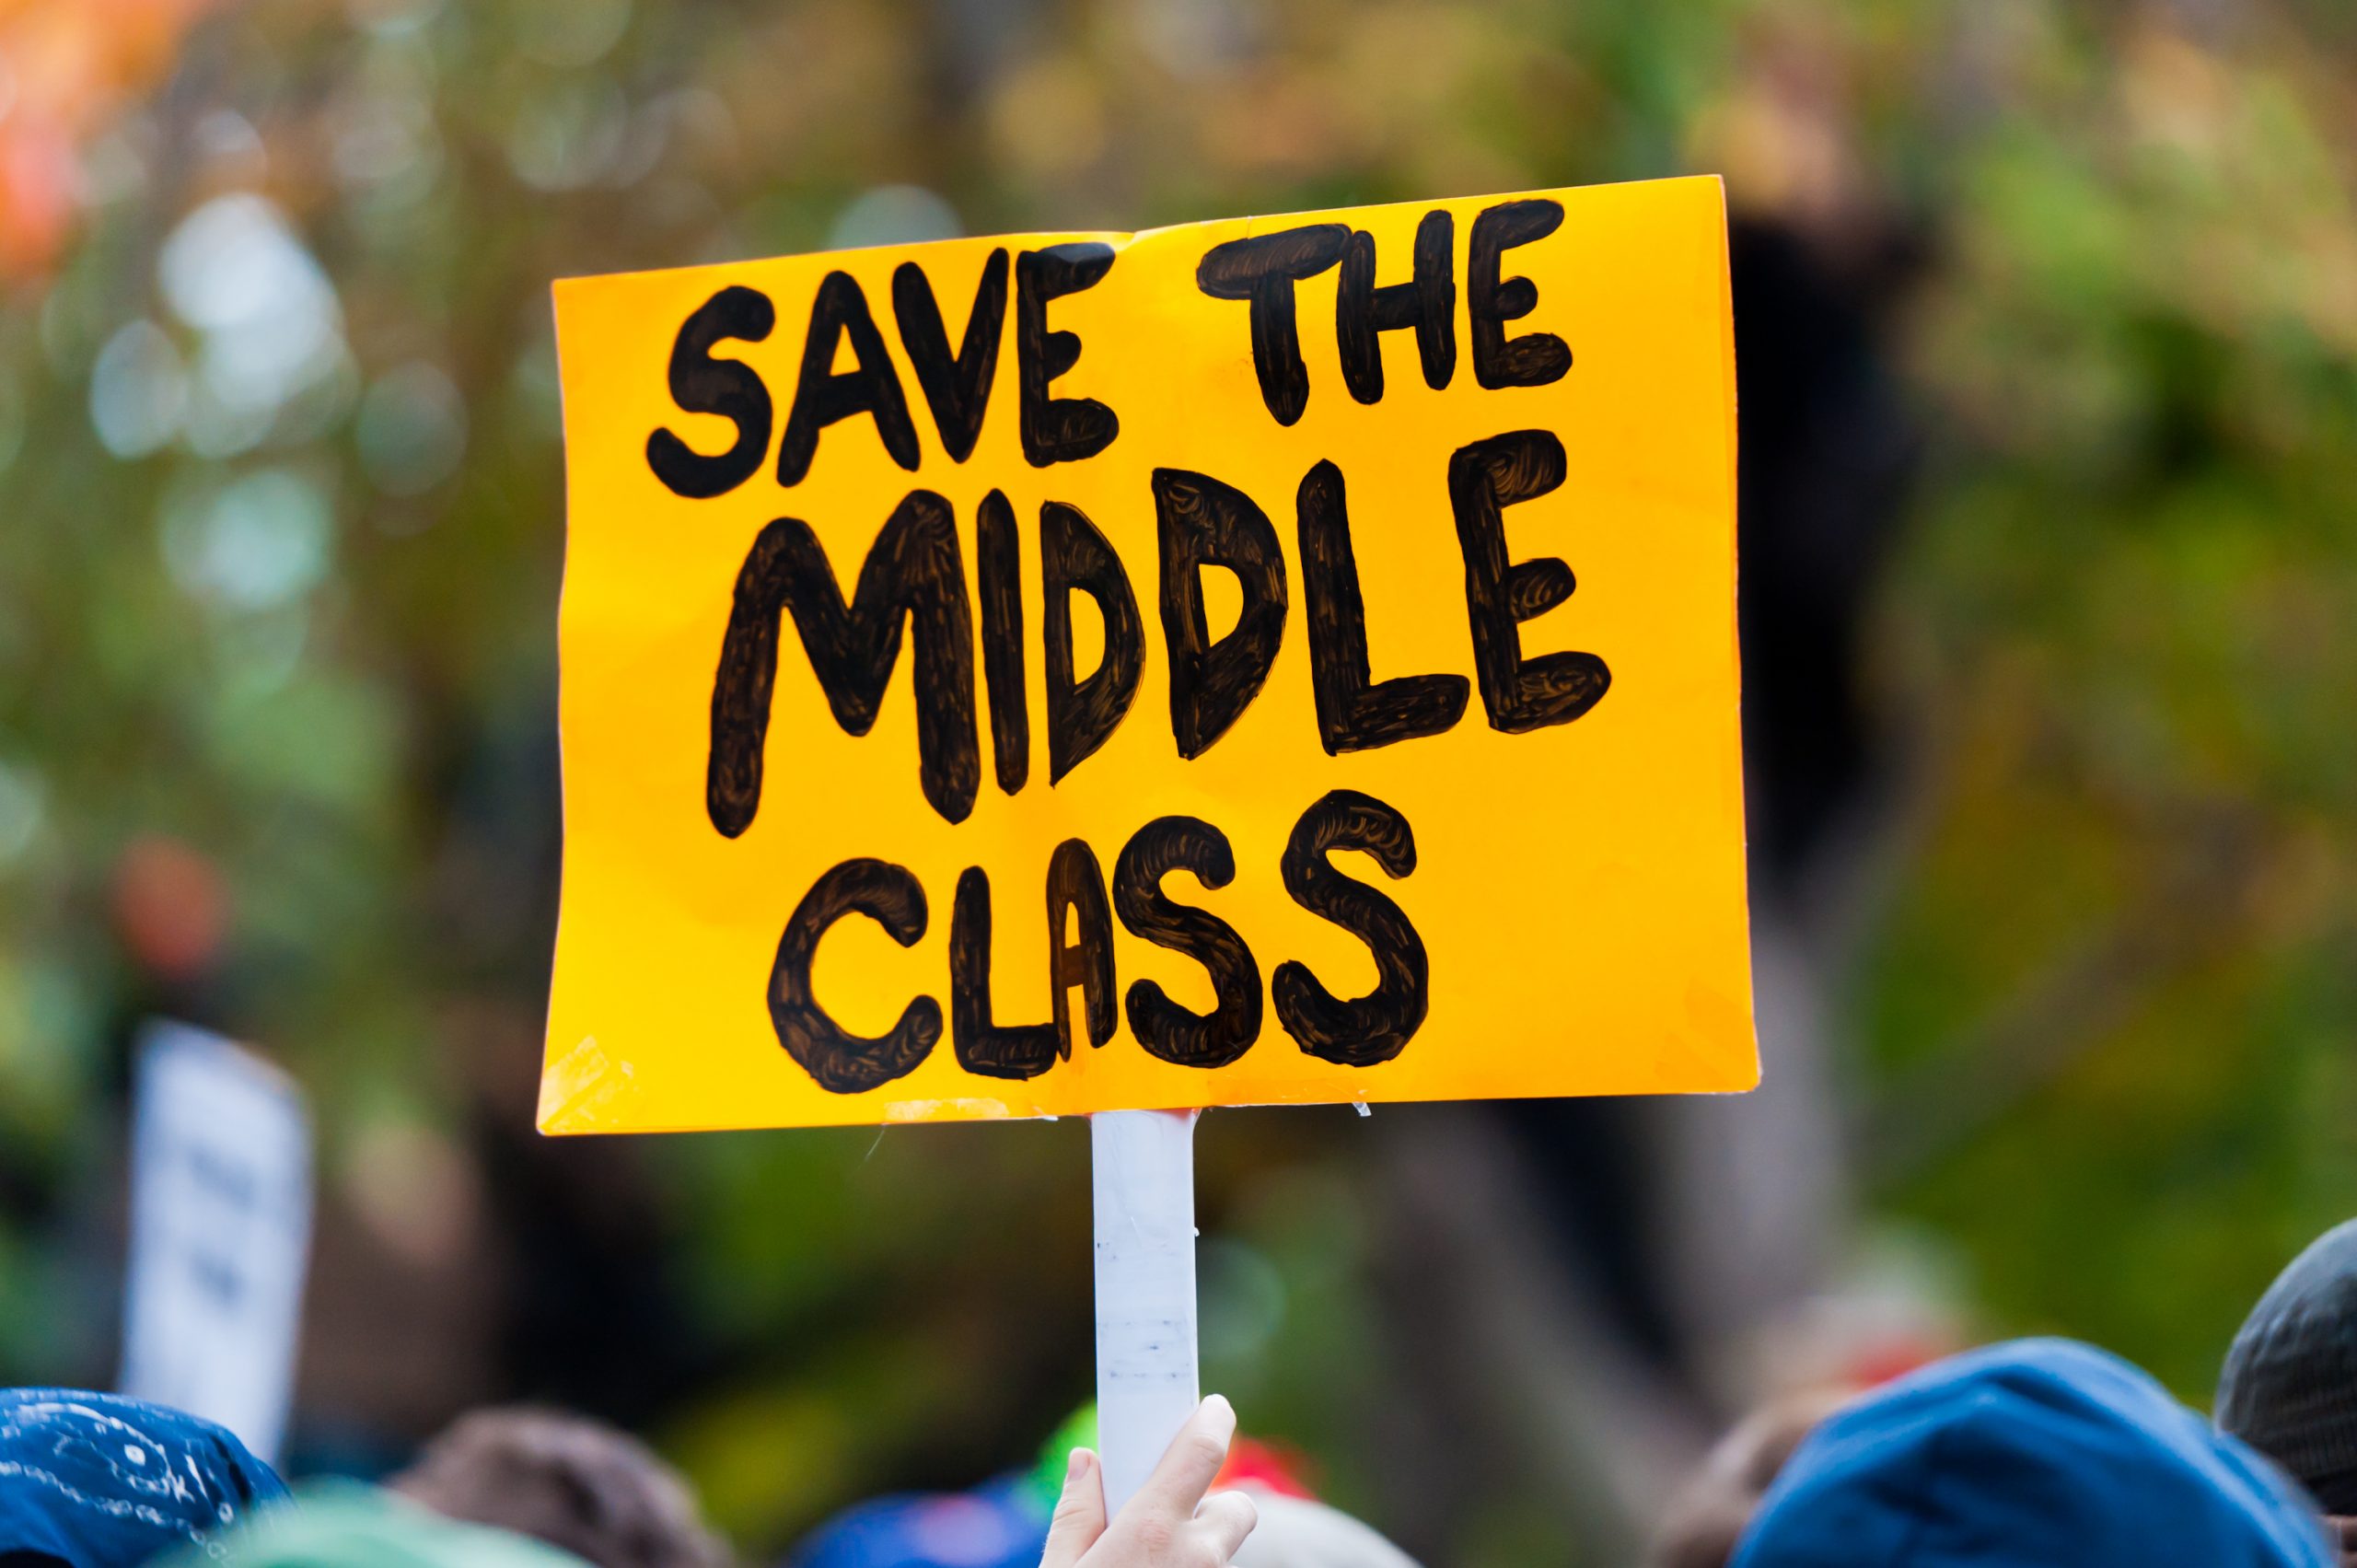 A protest sign reading "Save the Middle Class".